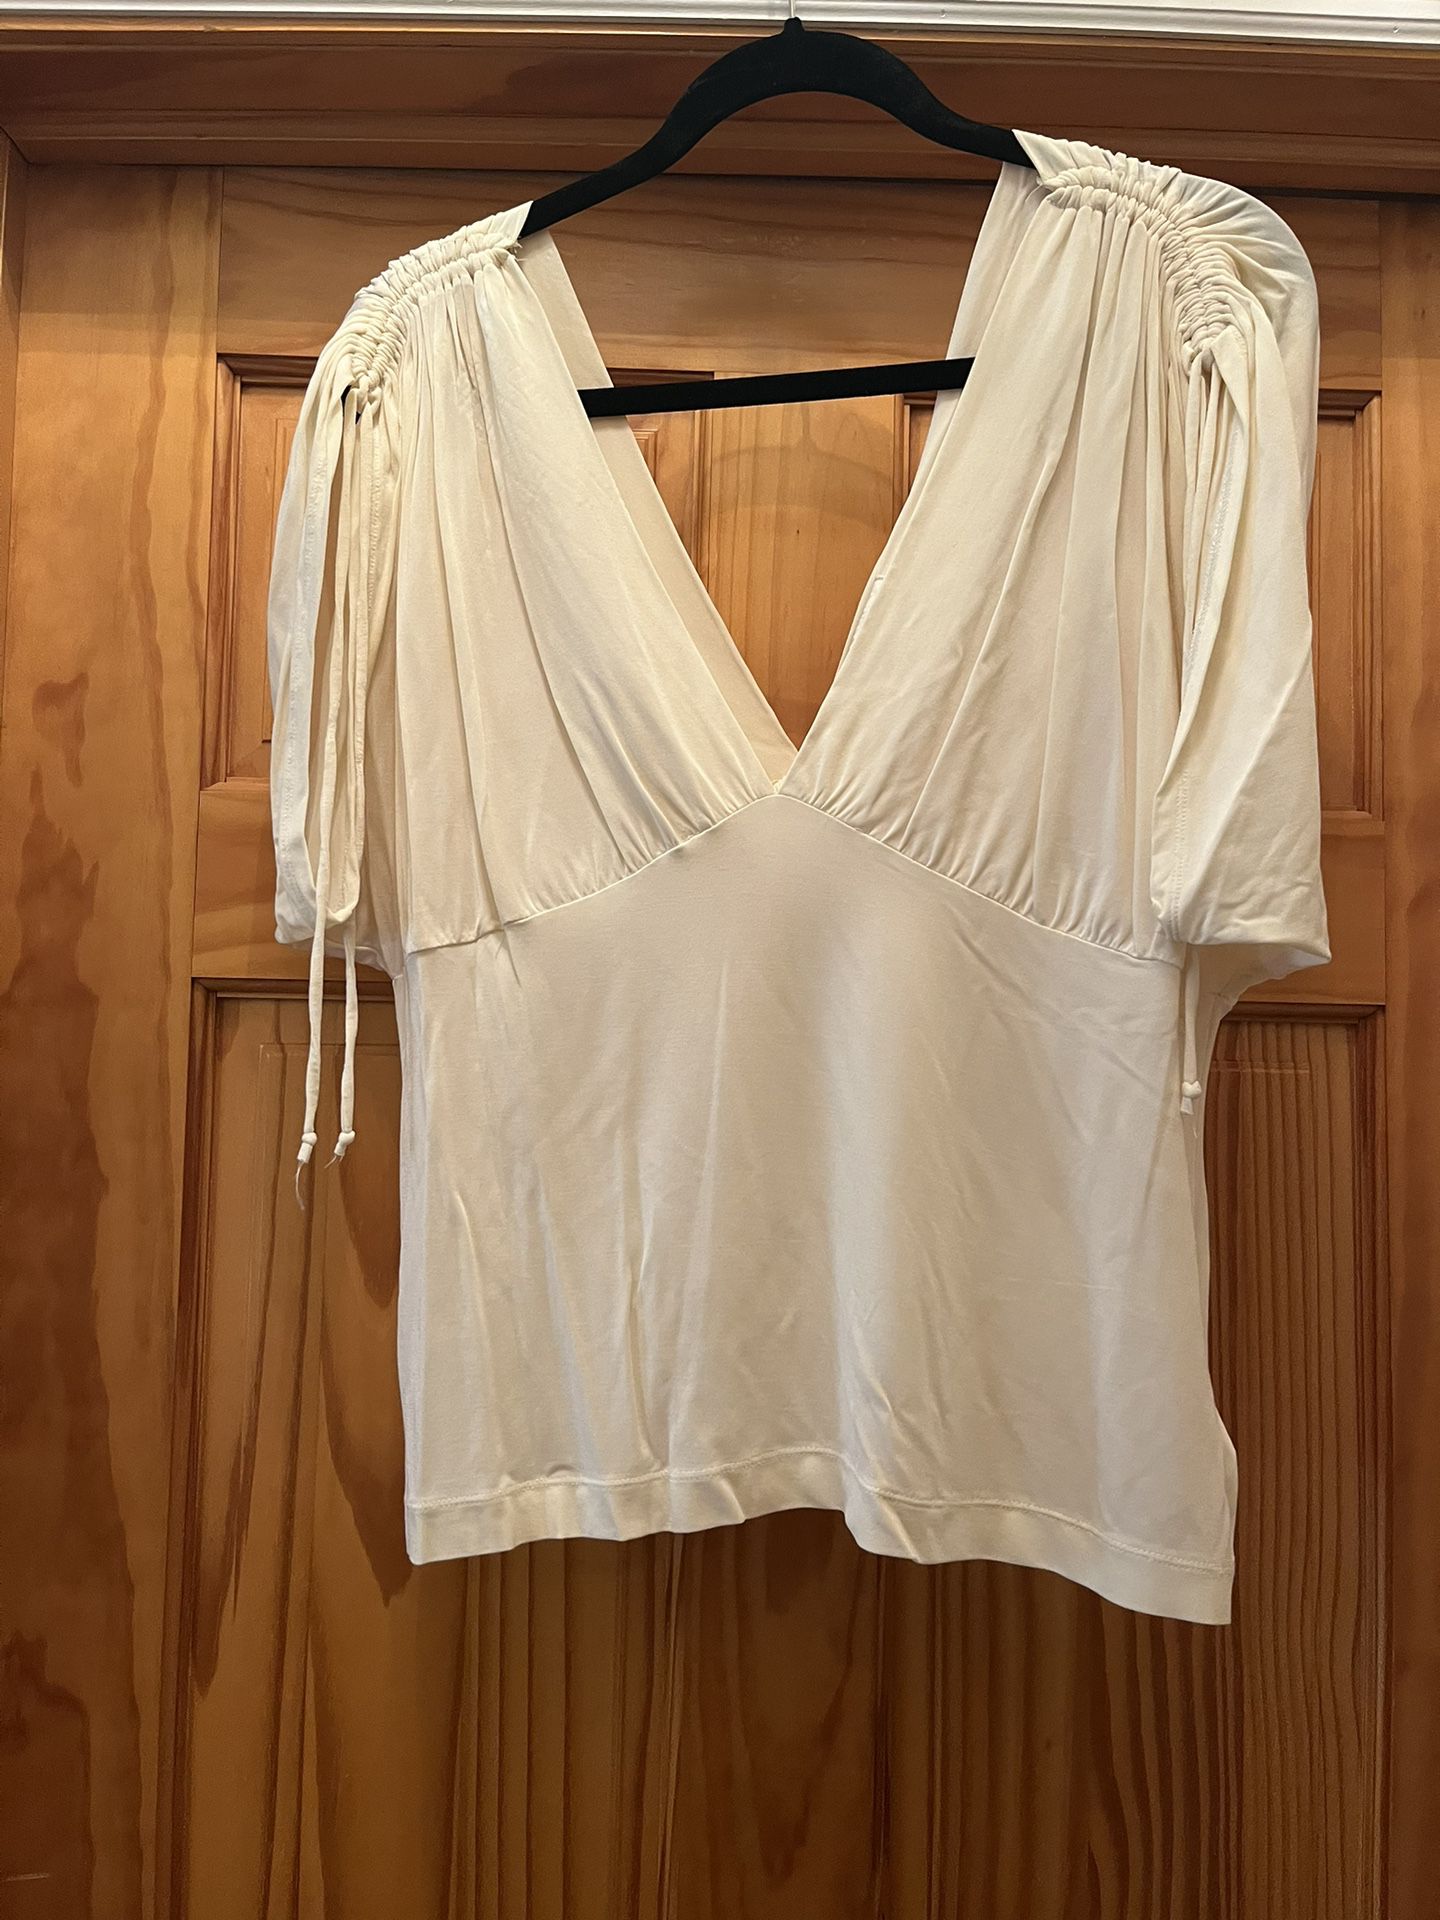 Banana Republic top for women, dressy design on top of each arm. Color white. In great condition. Size Xl Stretchy material. Made in Korea